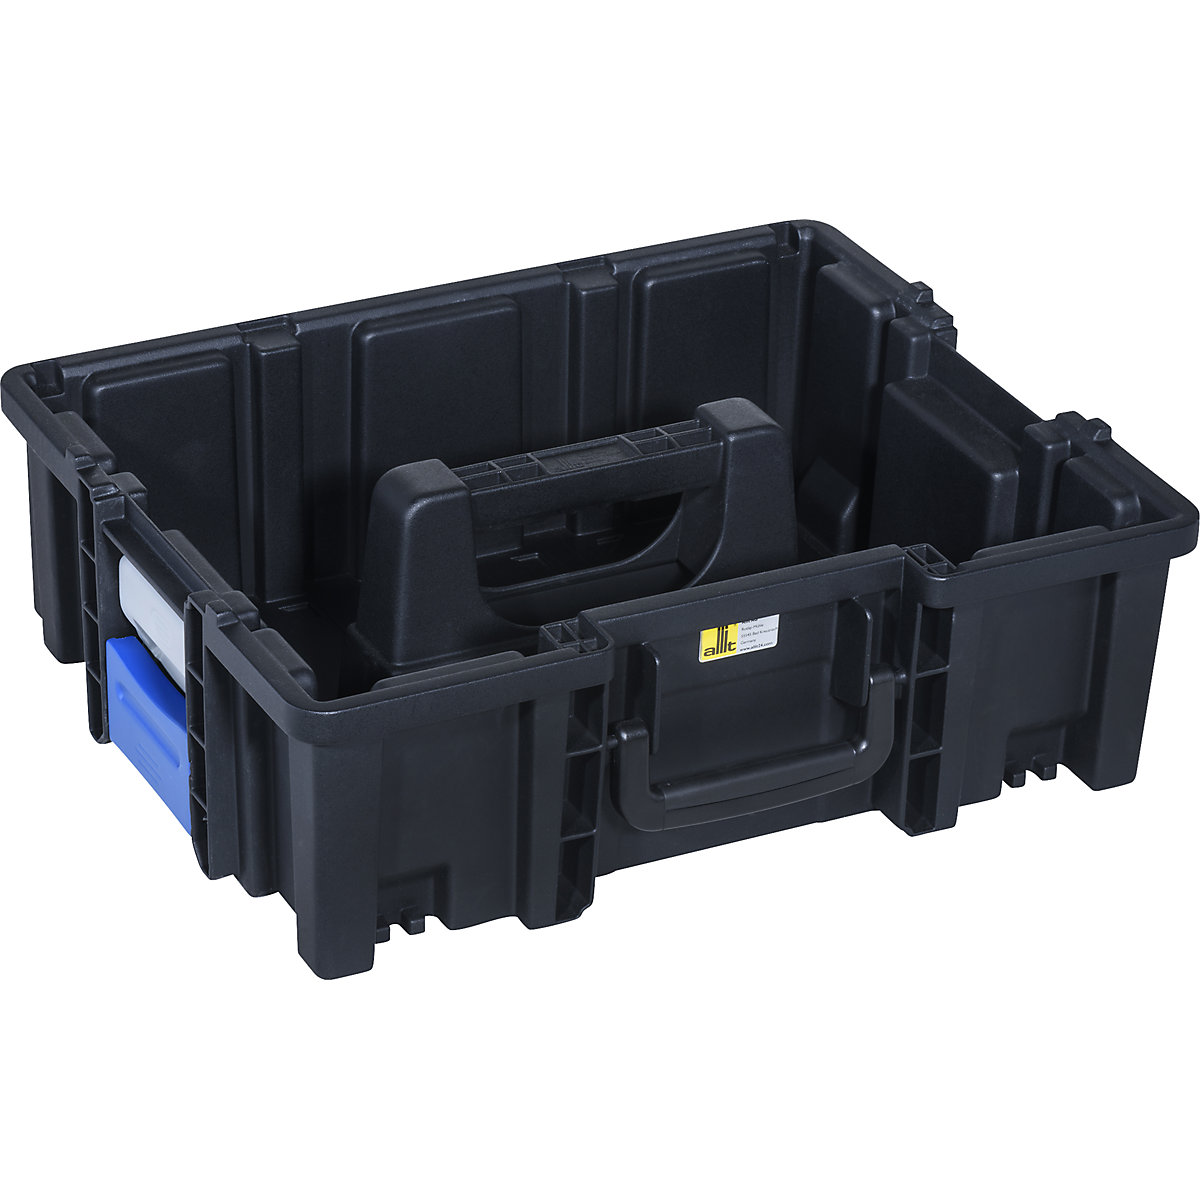 Professional carrying case with clips